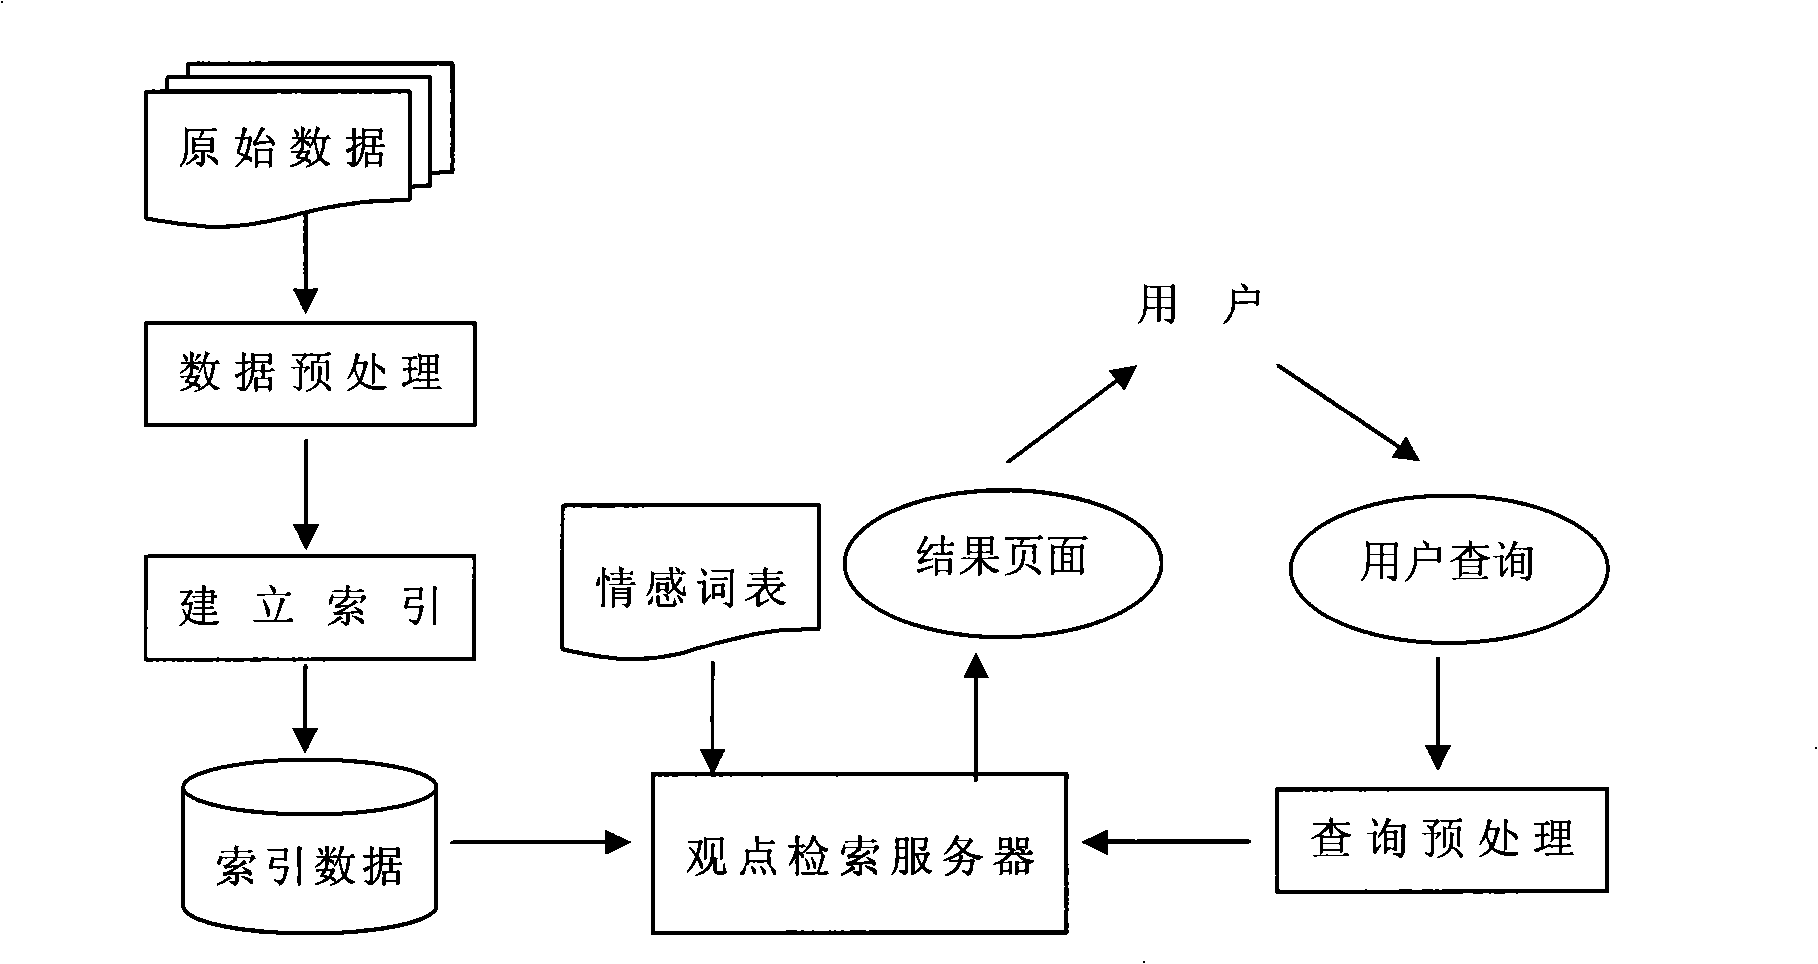 Grading method for information retrieval document based on viewpoint searching